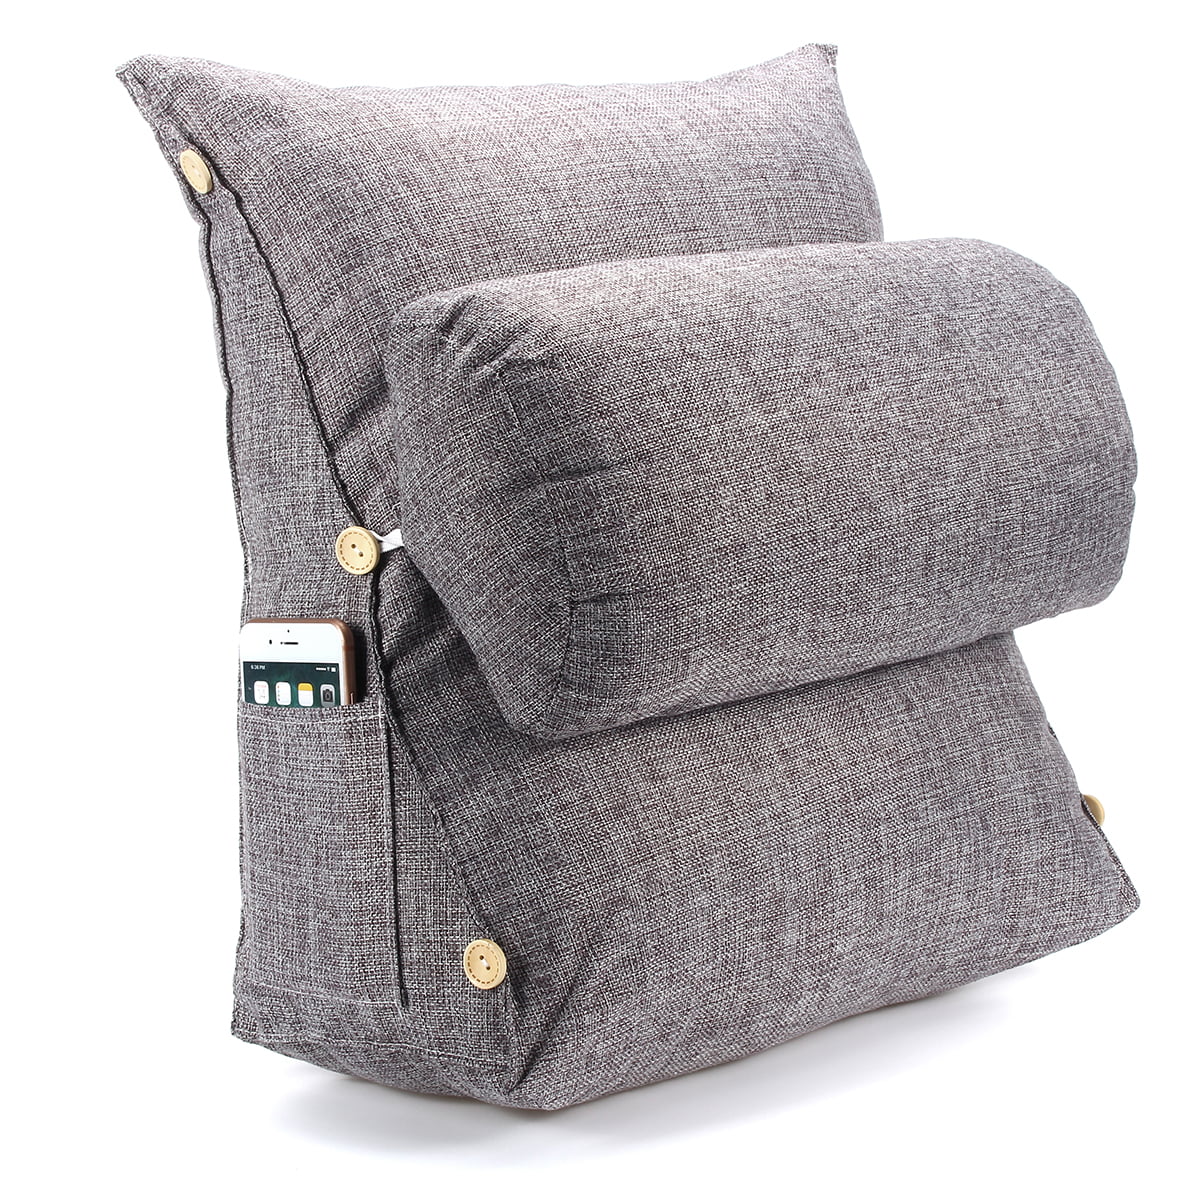 Adjustable Wedge Cotton Back Cushion Pillow Office Sofa Bed Backrest Waist Support Smoke Grey